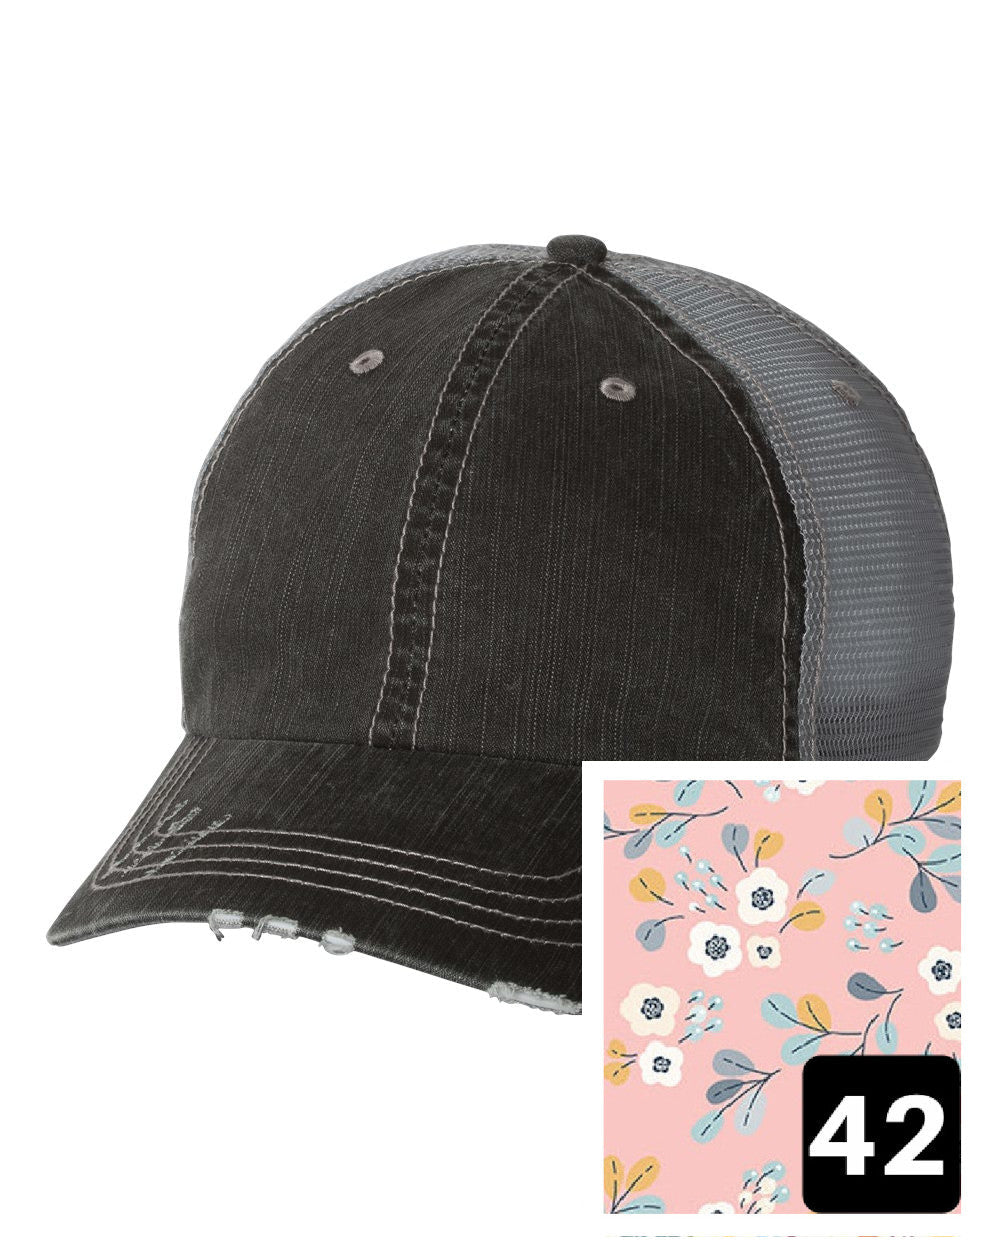 gray distressed trucker hat with light blue and pink mosaic fabric state of Connecticut